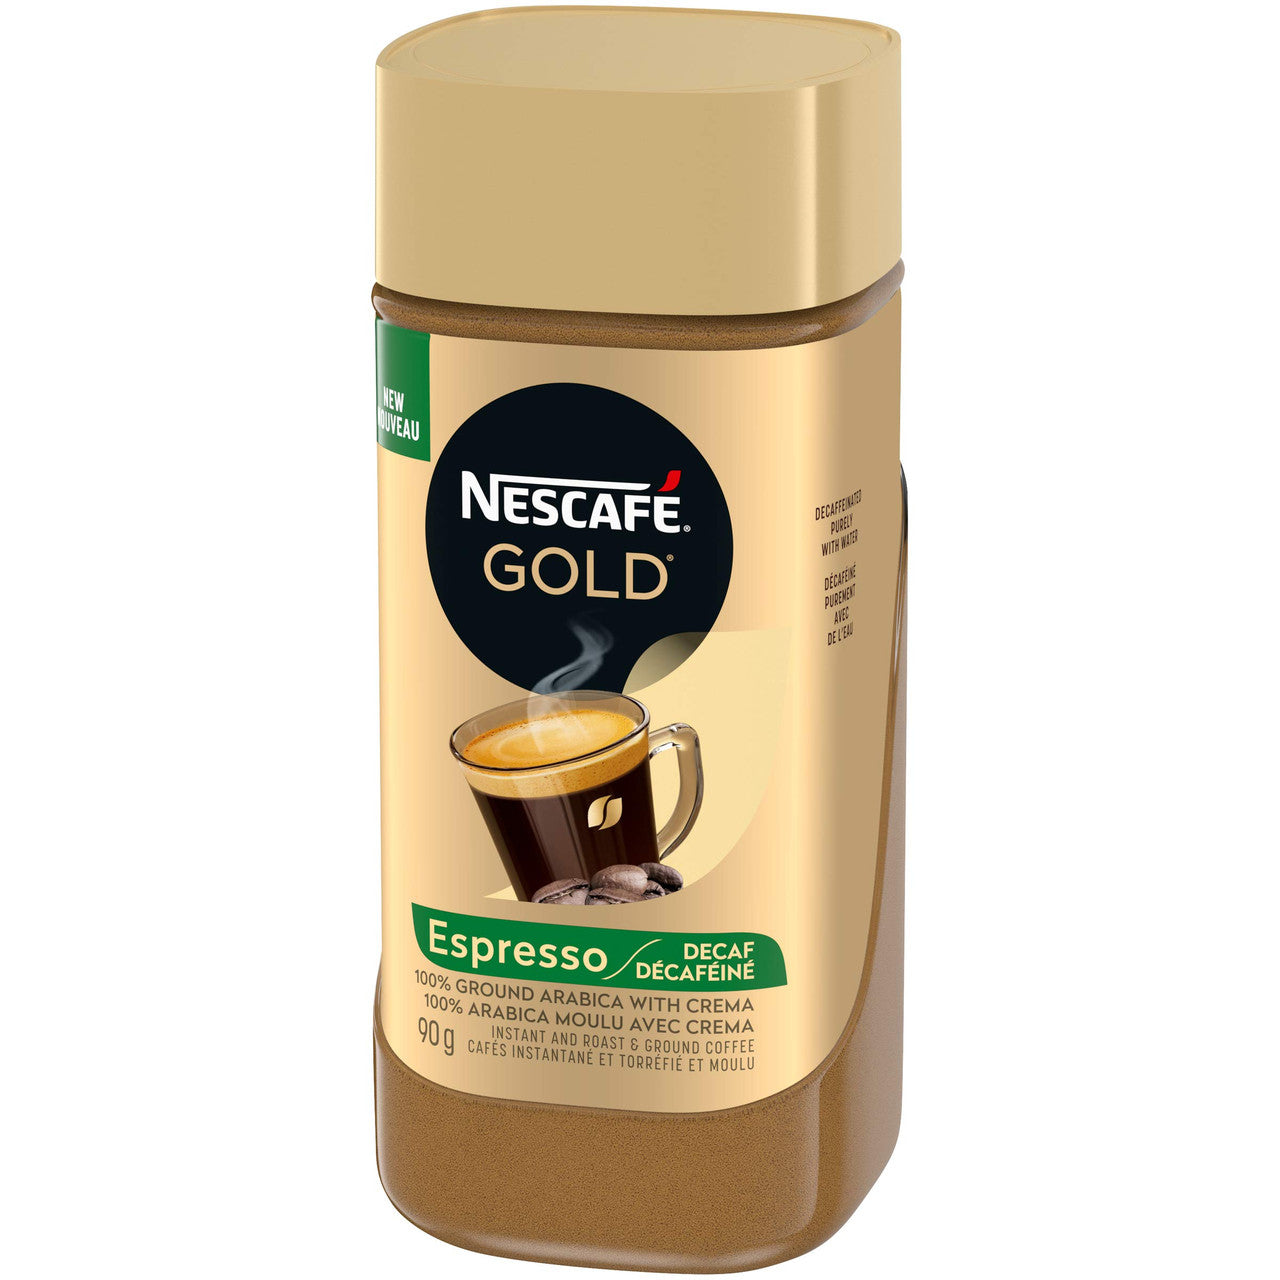 Nescafé Gold Espresso Decaf Instant Coffee, 90g/3.2 oz., Jars, 6 Count, {Imported from Canada}